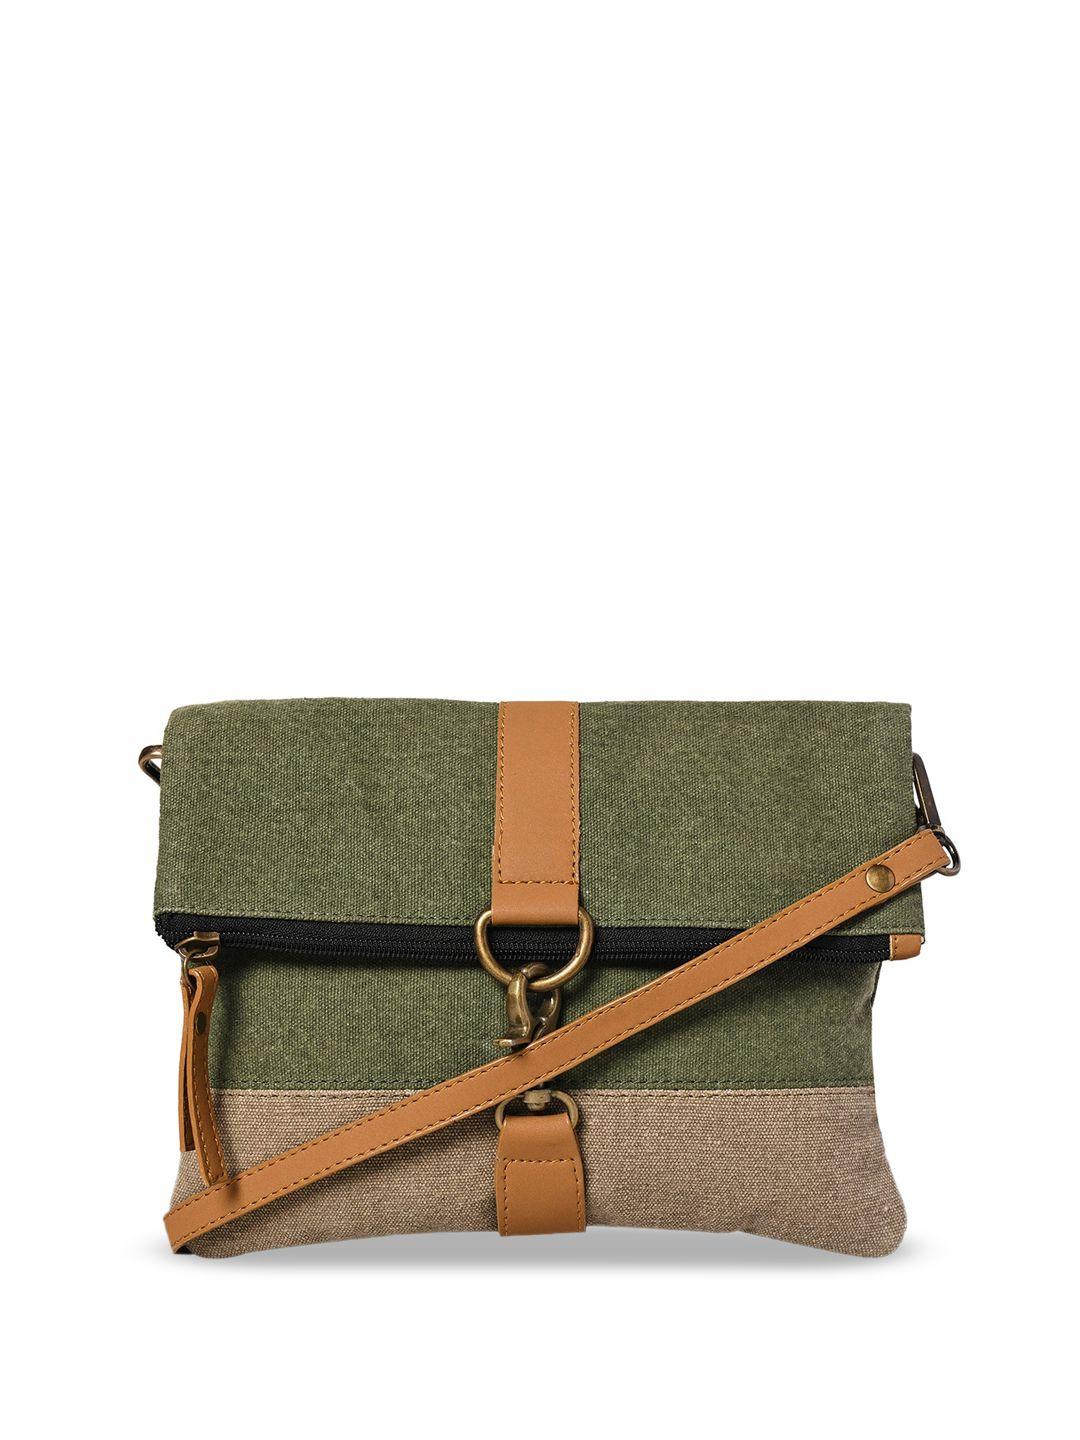 mona b green colourblocked structured sling bag with cut work